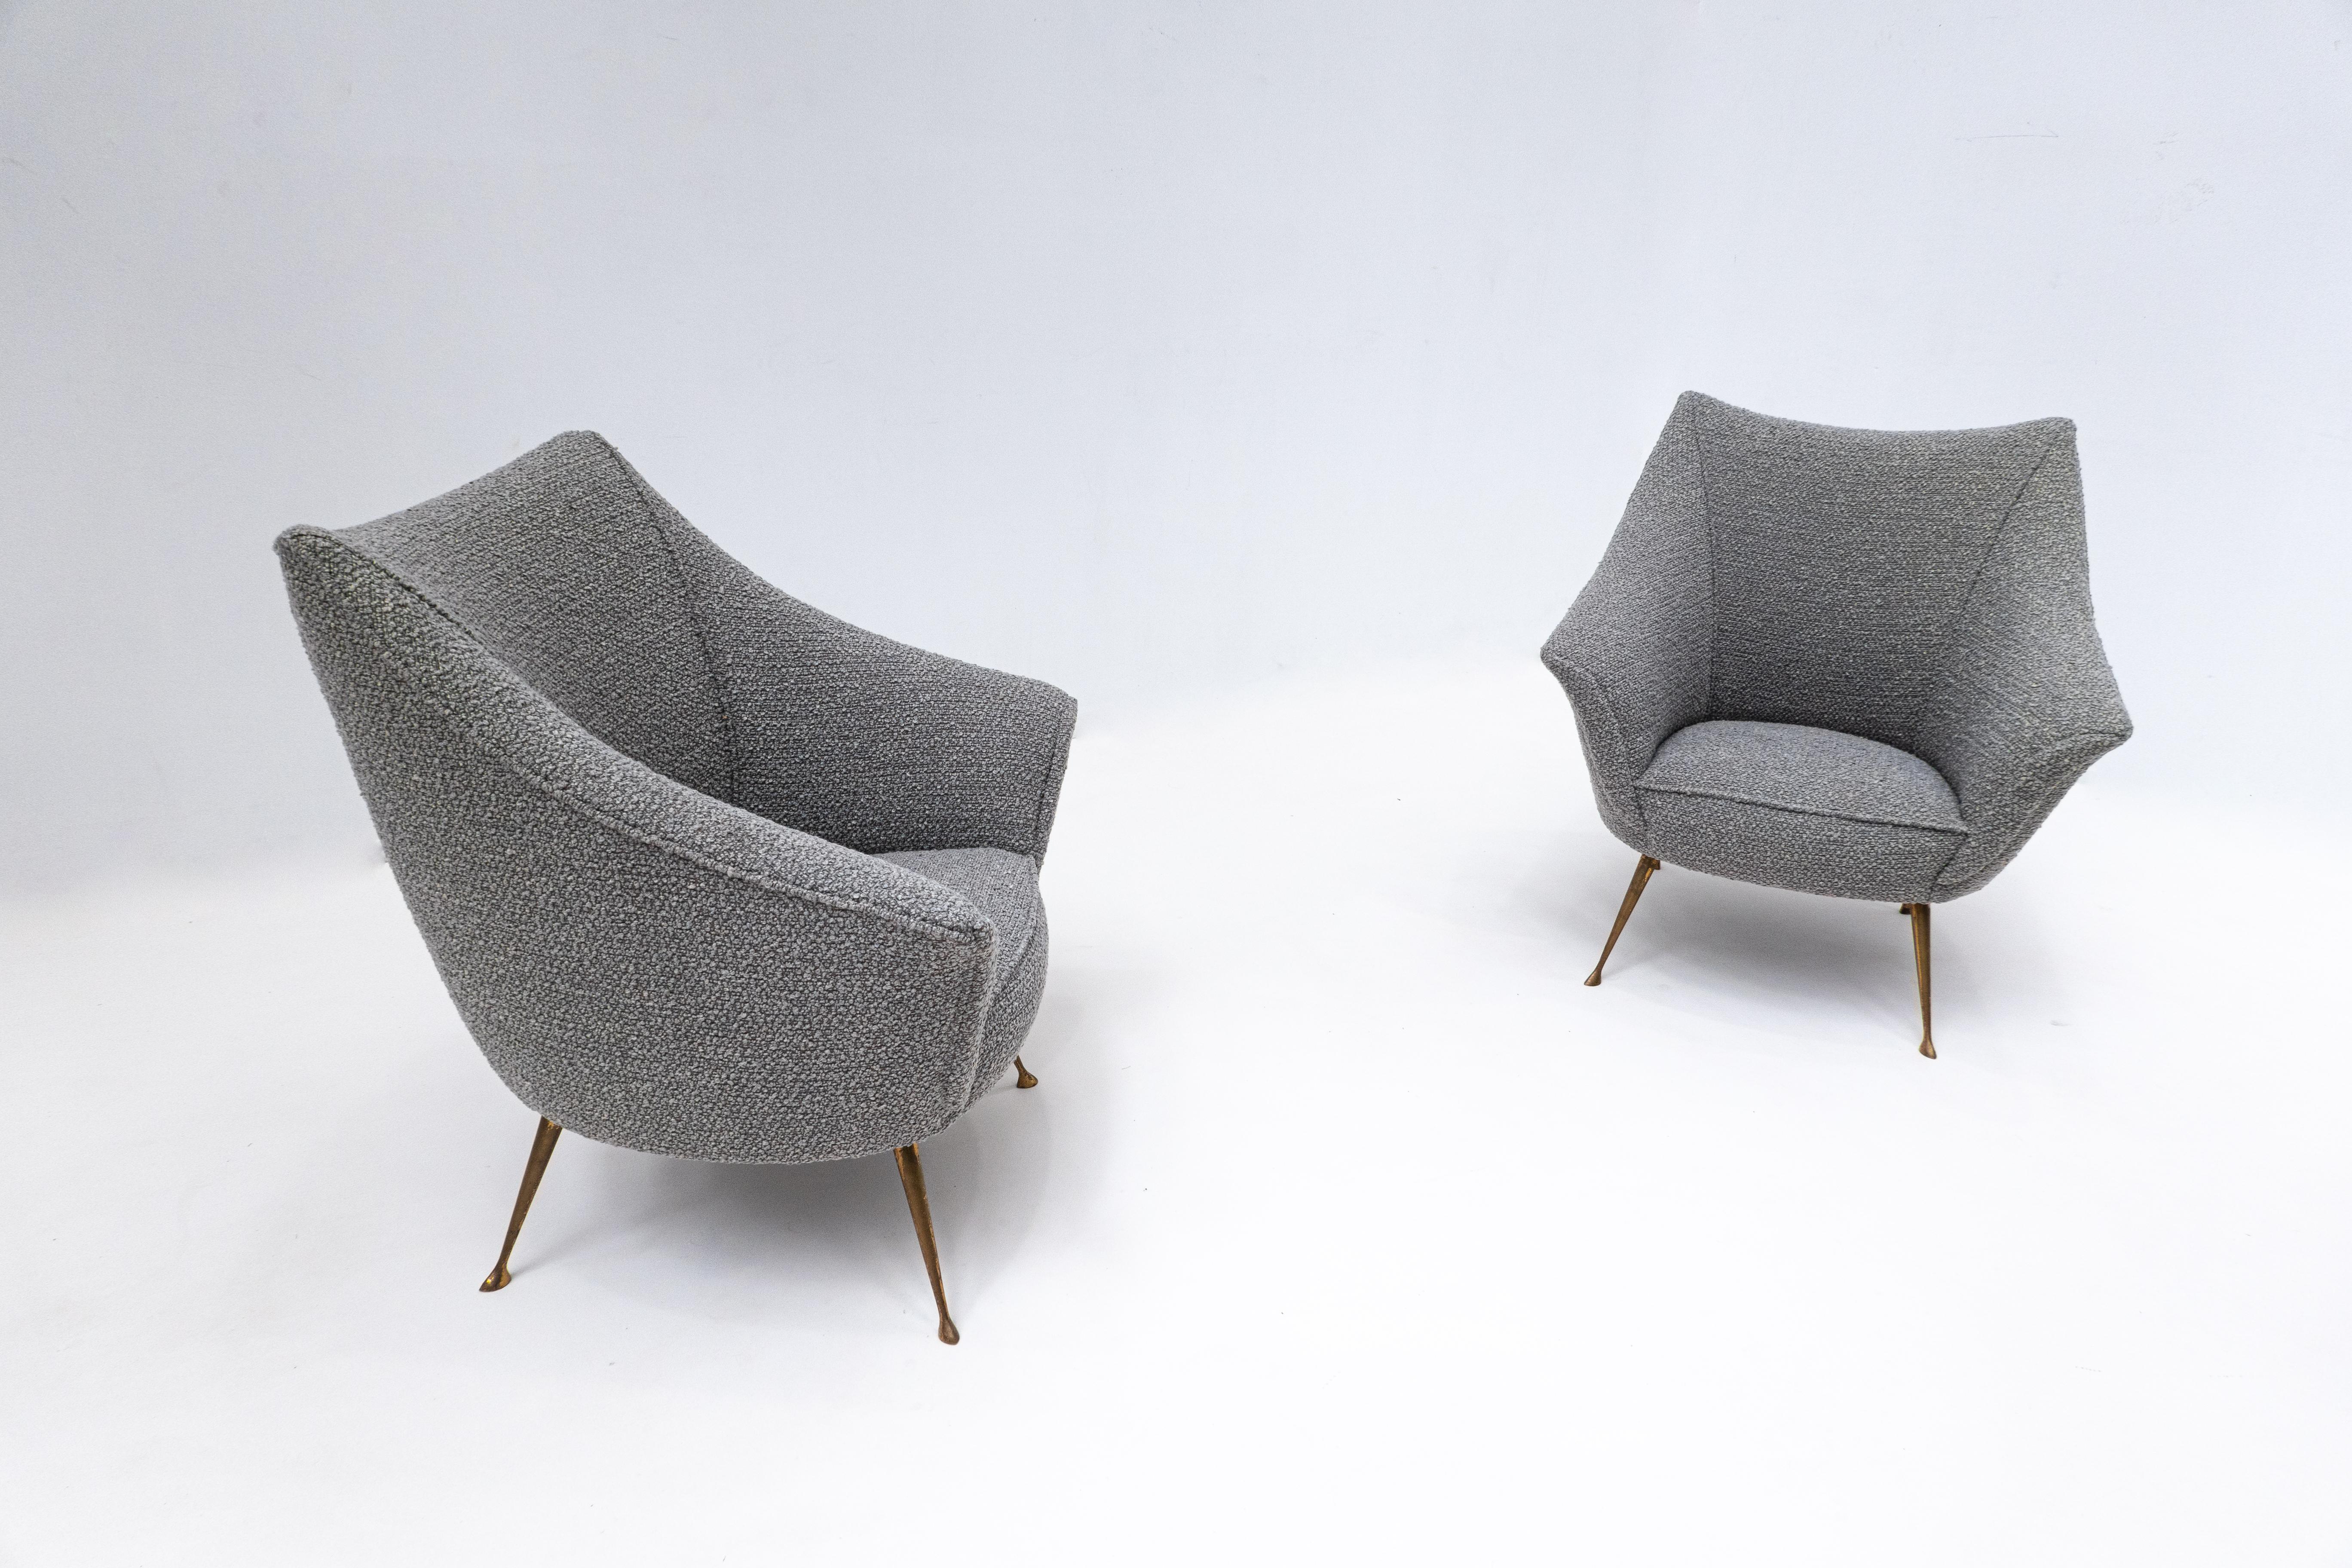 Pair of mid-century grey new upholstery and brass feets armchairs - Italy 1950s.